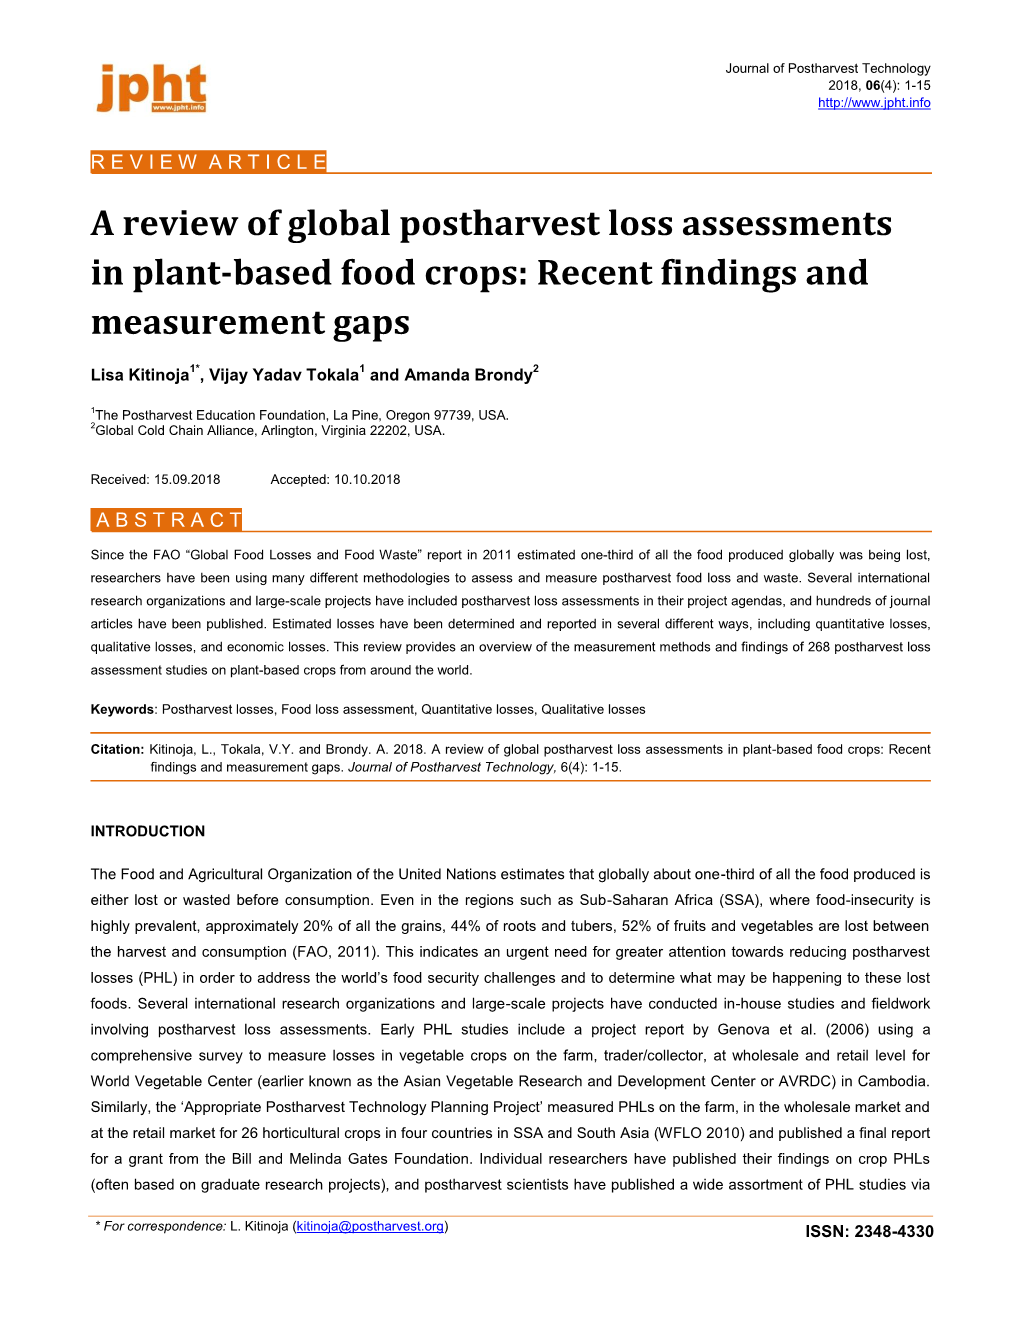 A Review of Global Postharvest Loss Assessments in Plant-Based Food Crops: Recent Findings and Measurement Gaps